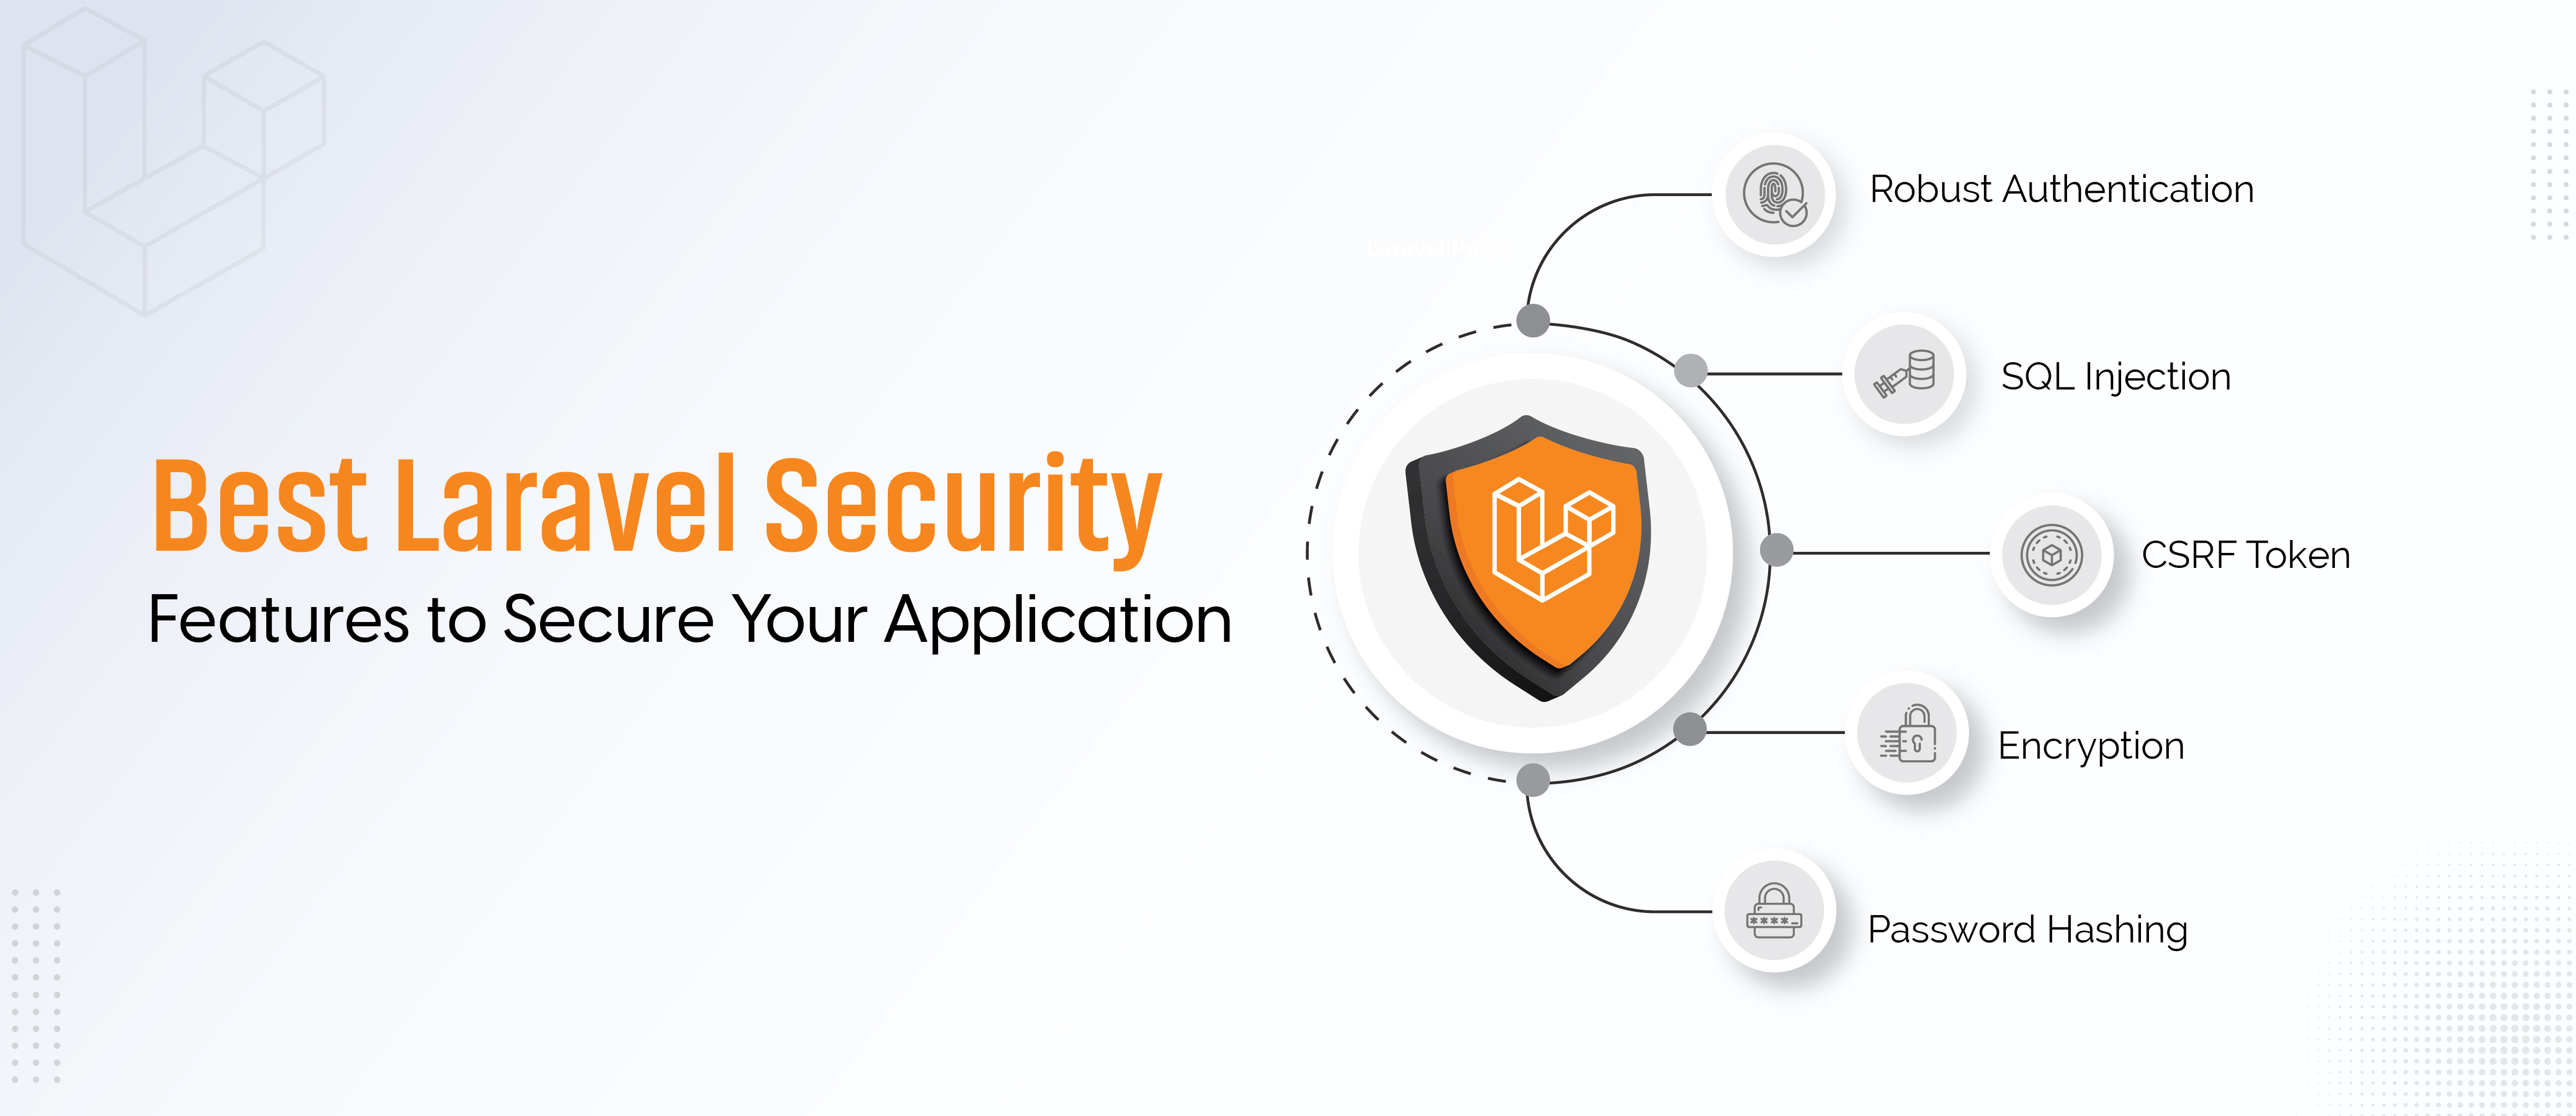 Best Laravel Security Features to Secure Your Application